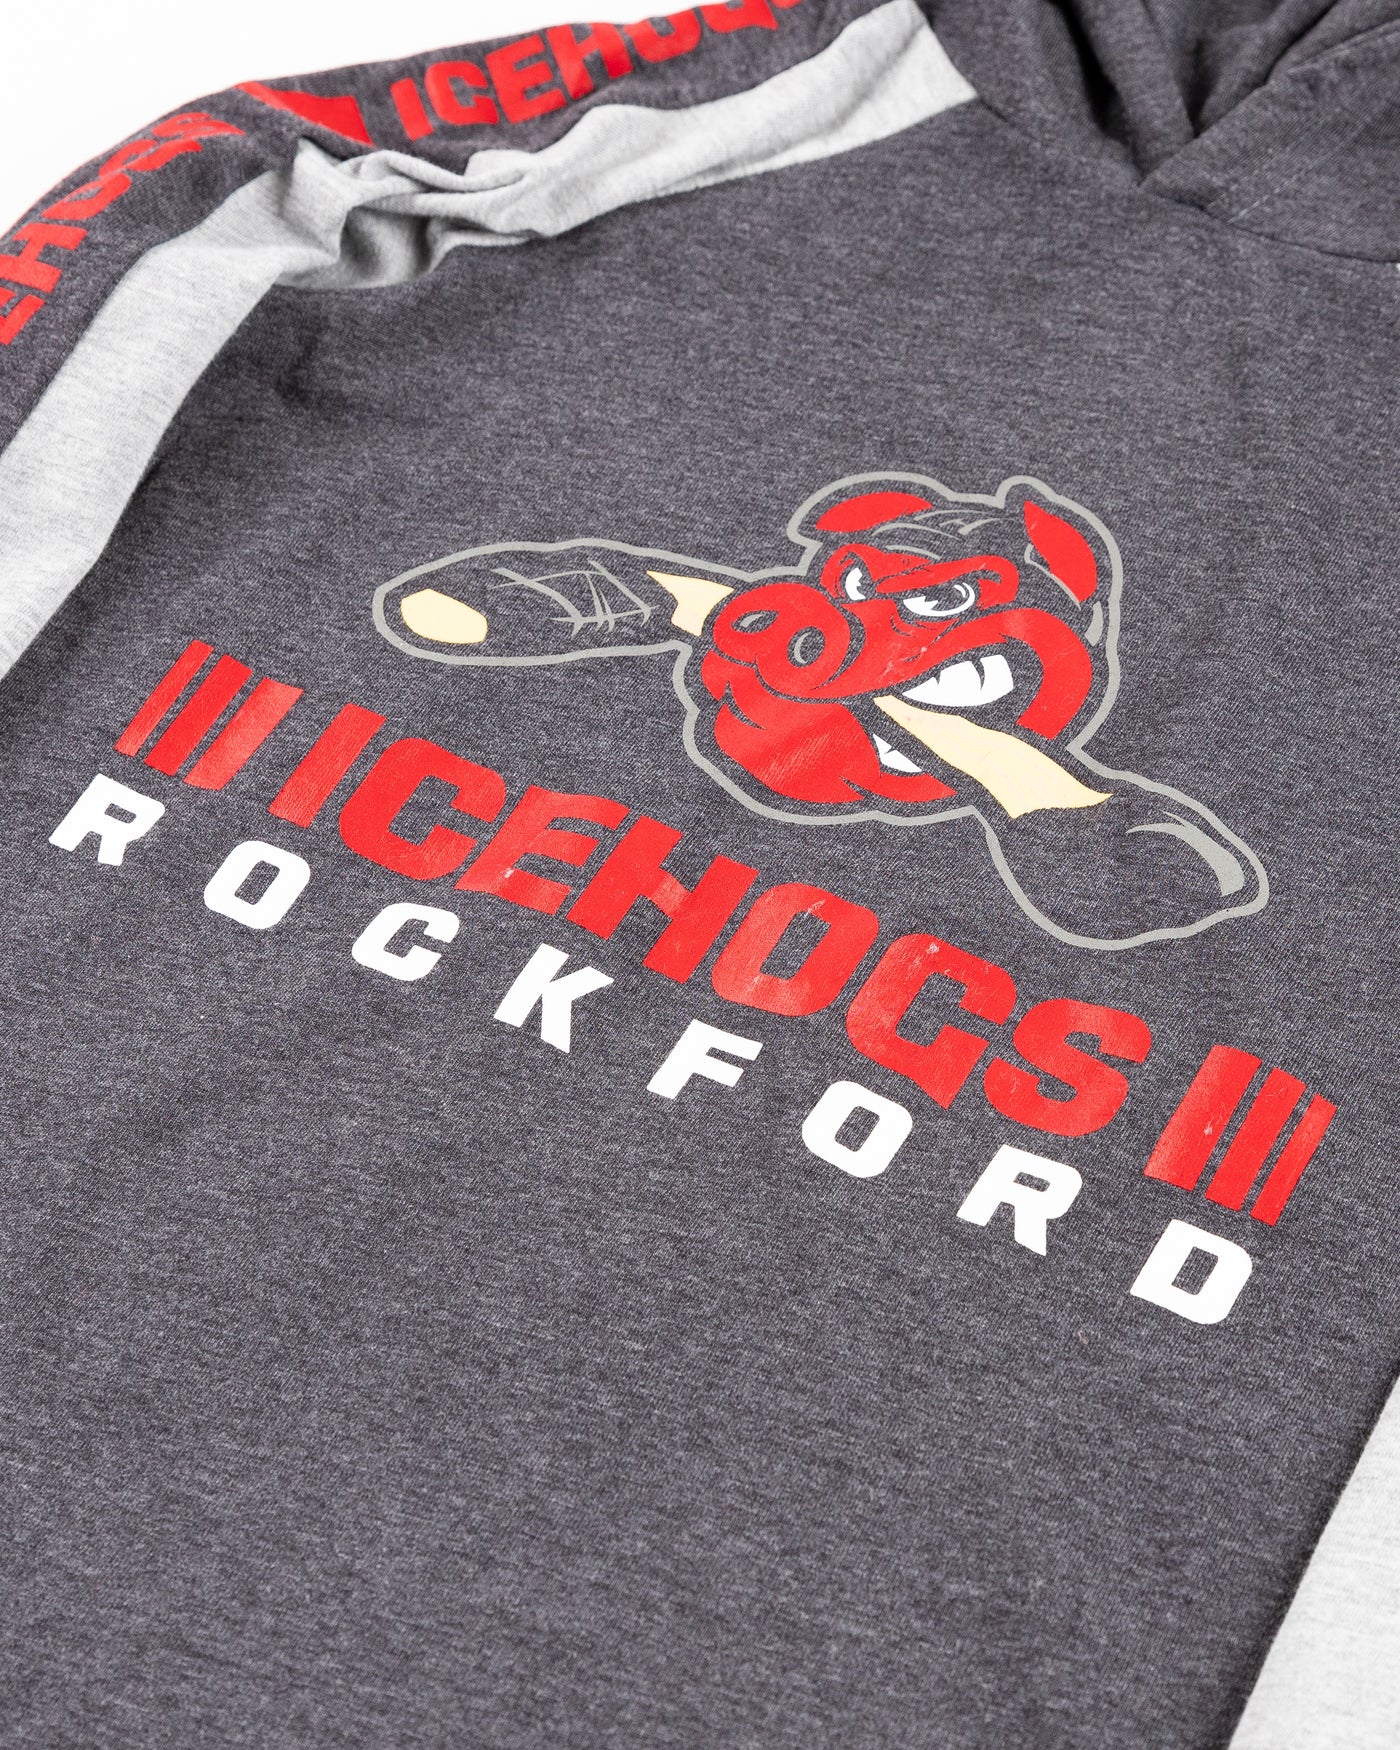 Colosseum two tone youth hoodie with Rockford IceHogs logo across front and wordmark on sleeves - detail lay flat